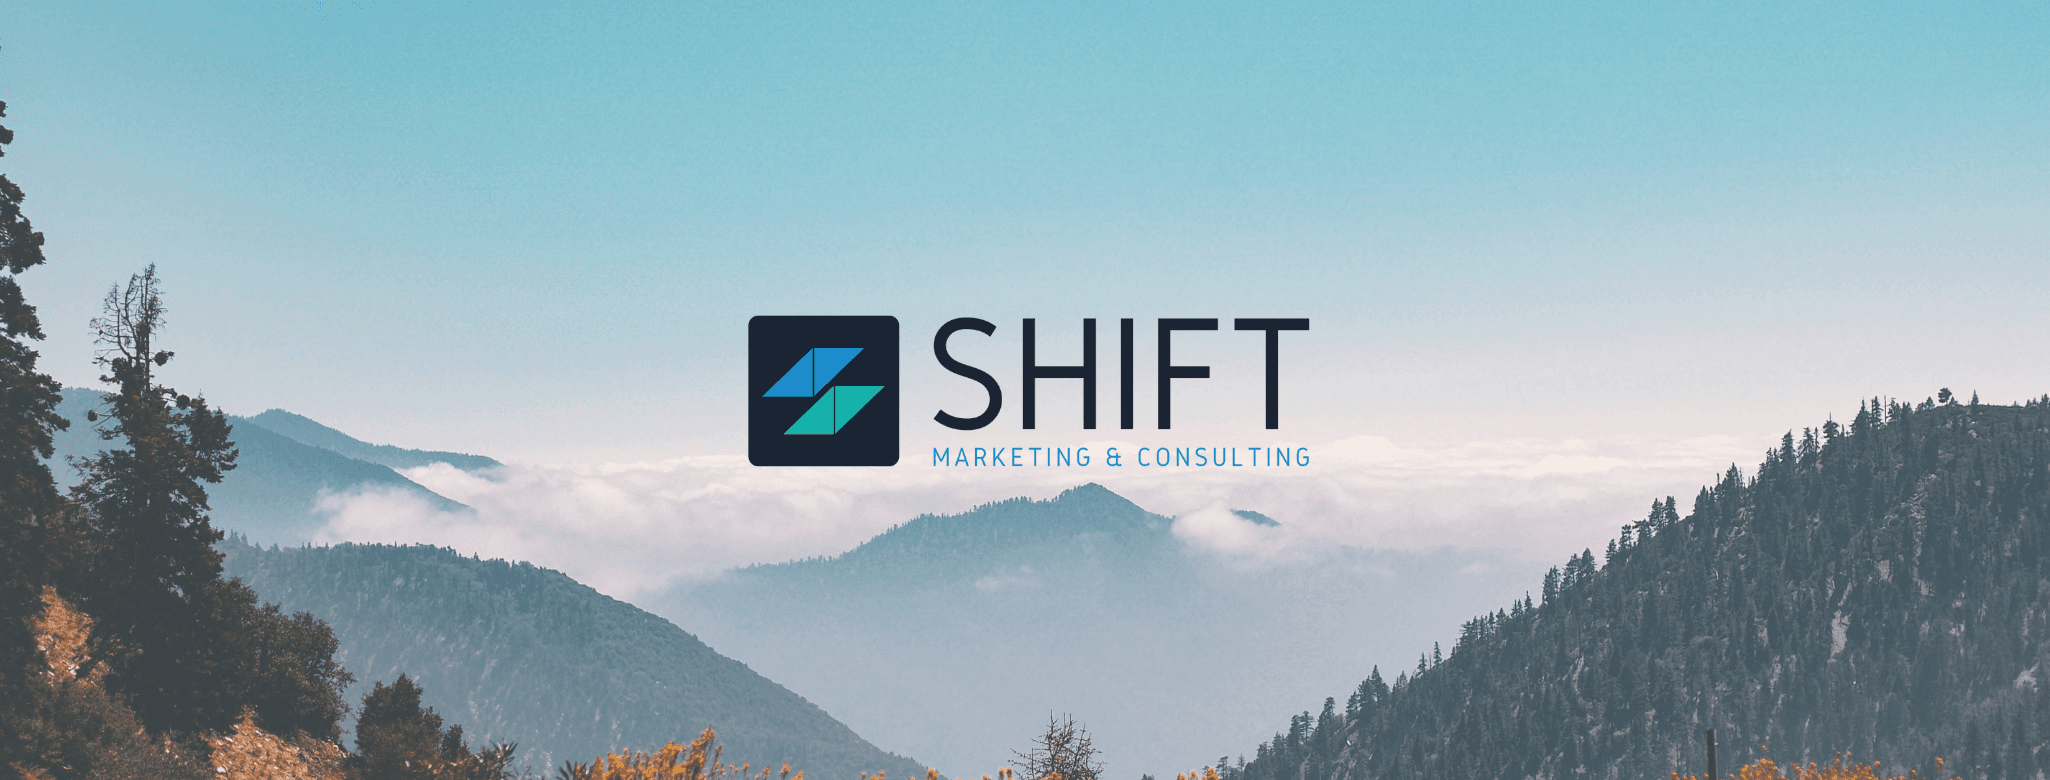 Product Services | Shift Marketing & Consulting image